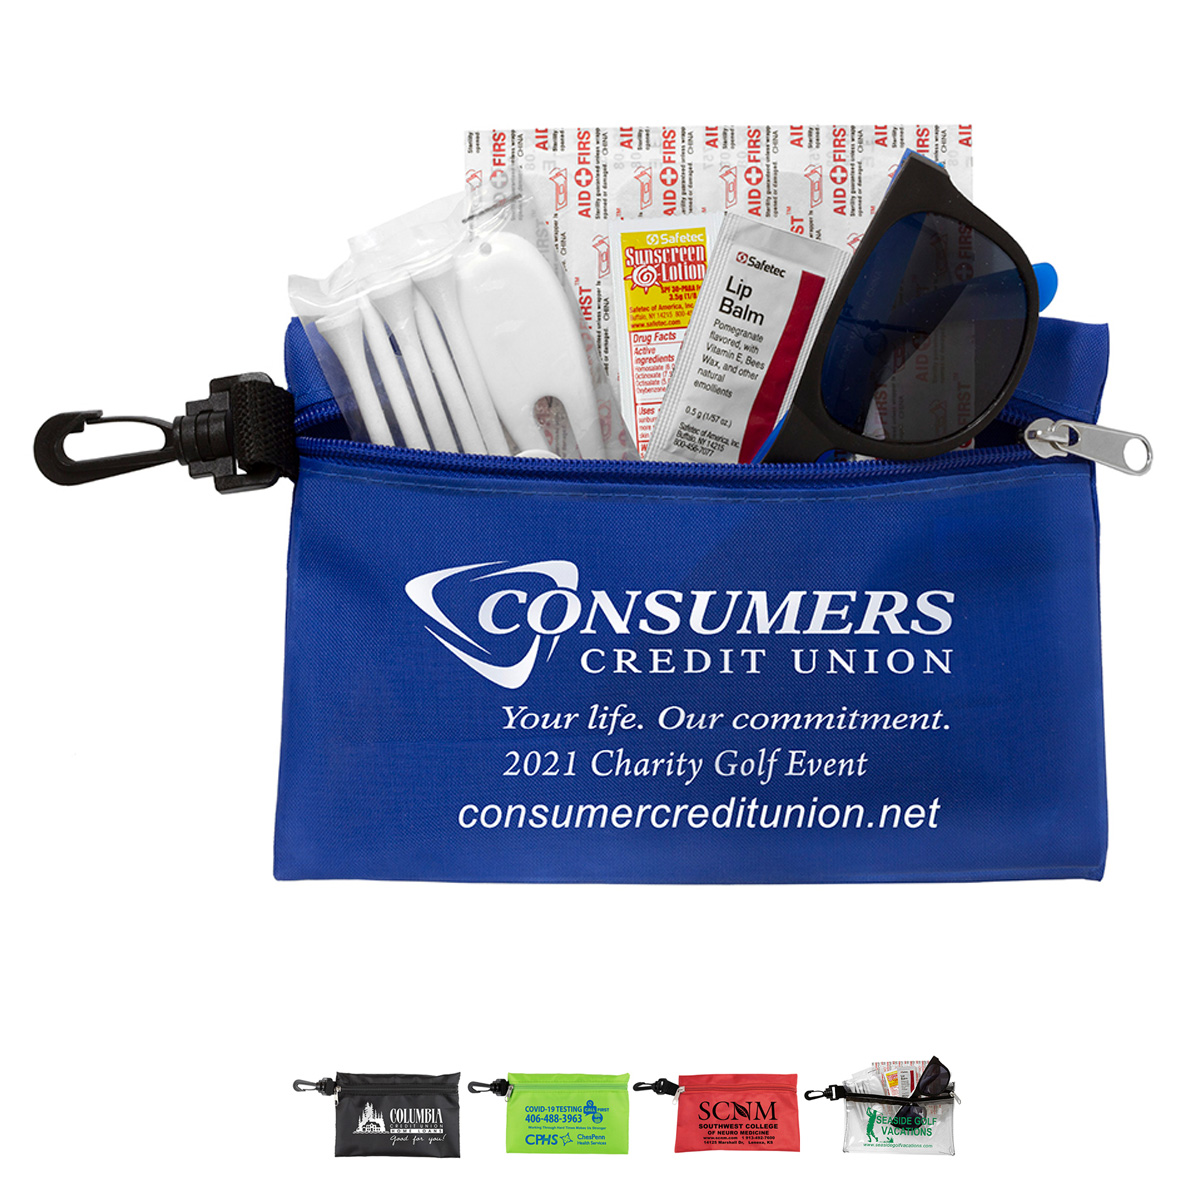 "CHIP" 14 Piece Golf Kit in Supersized Zipper Pack Components inserted into Zipper kit with Plastic Carabiner Attachment